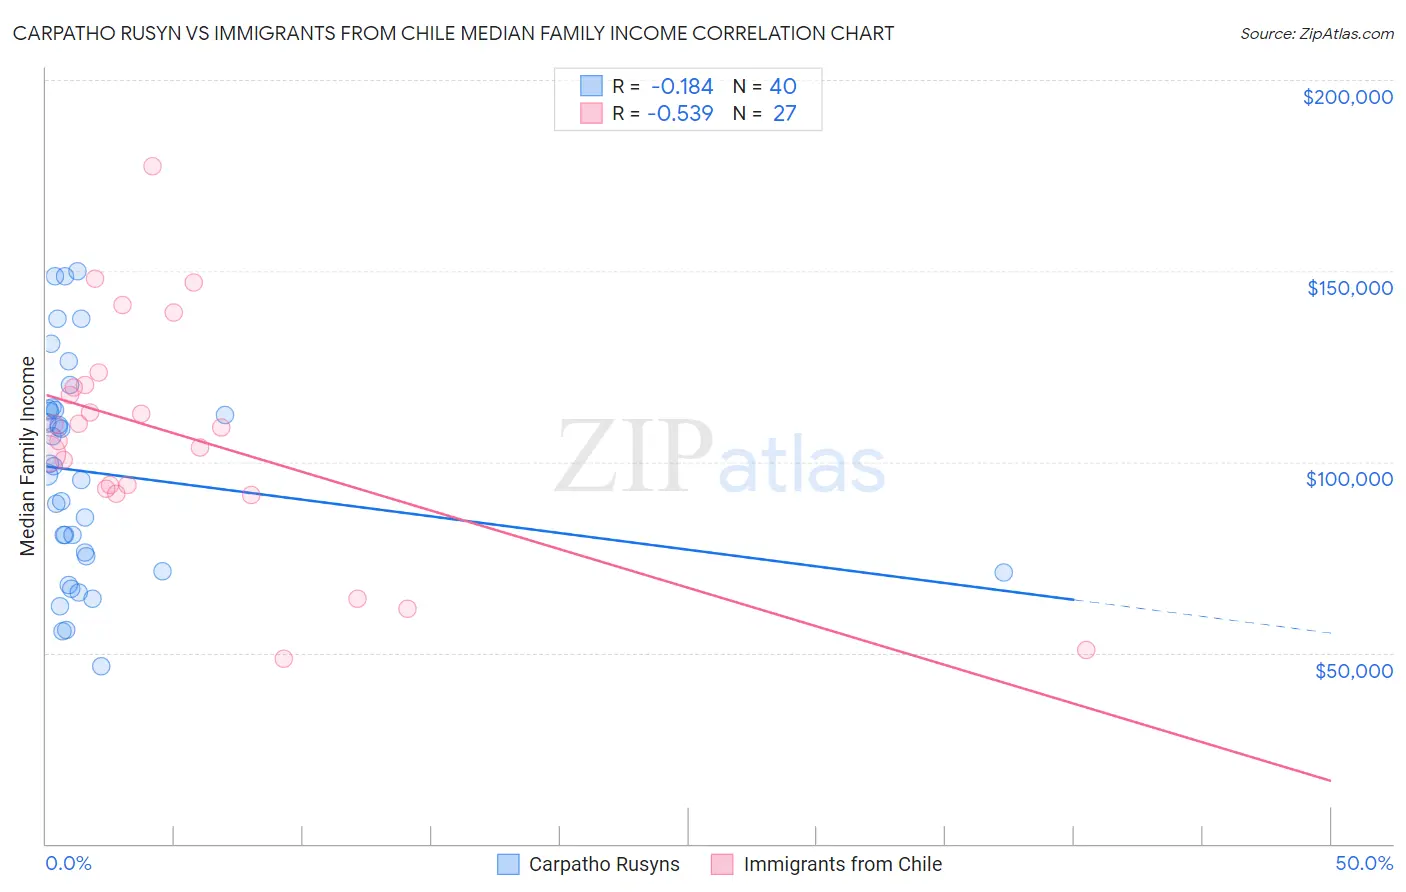 Carpatho Rusyn vs Immigrants from Chile Median Family Income